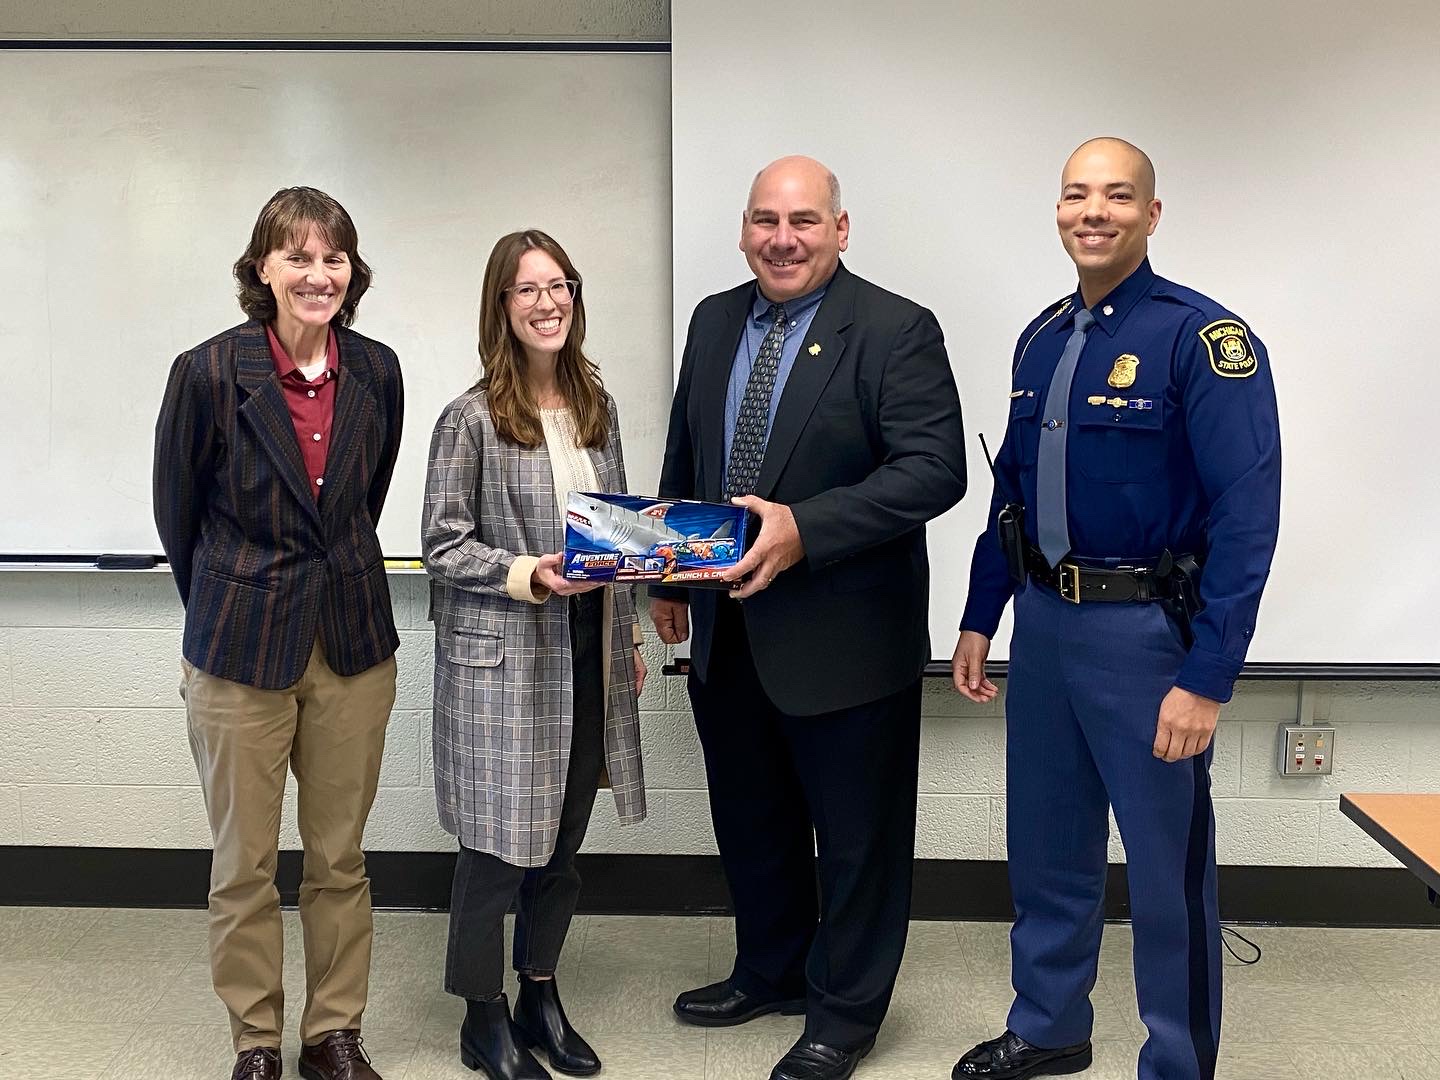 Winner Emily Gerkins receives her SharkTank trophy from the Michigan State Police representatives